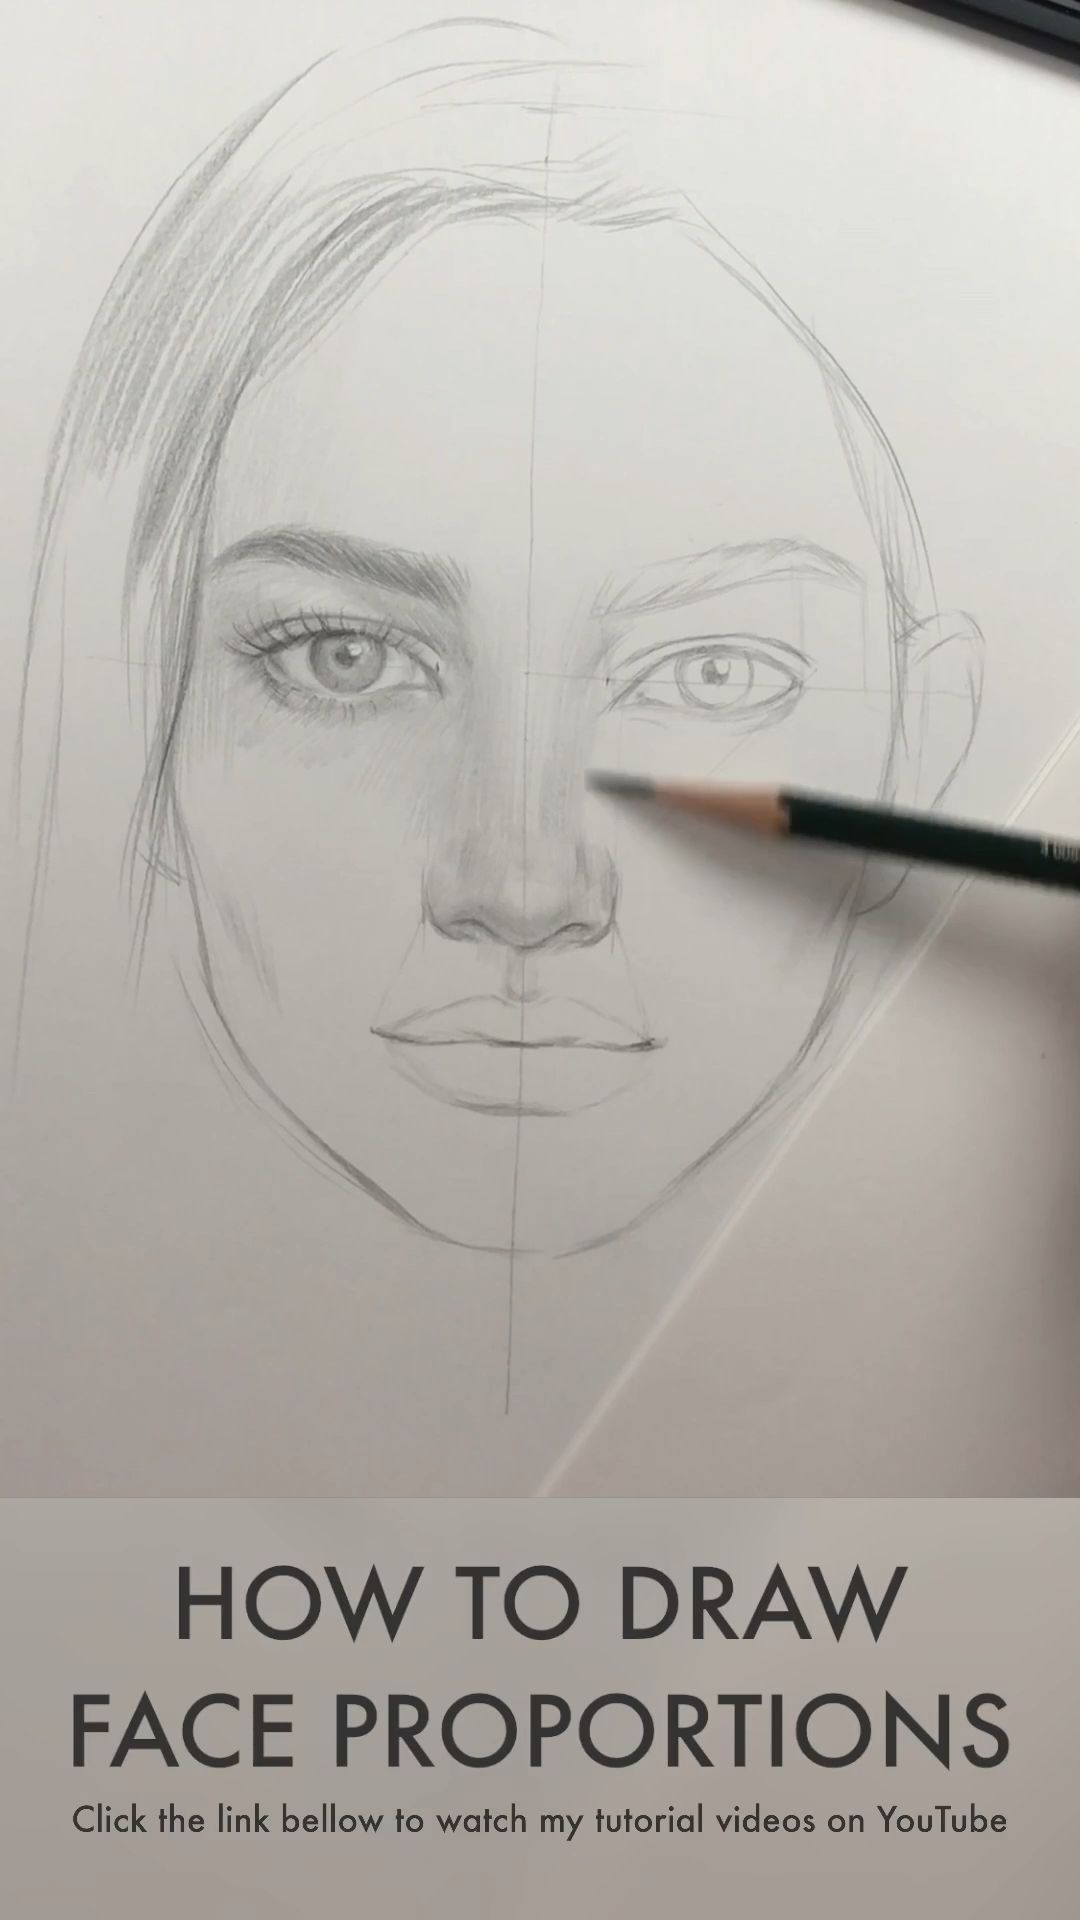 How to draw a face. Face proportions by Nadia Coolrista  - YouTube - How to draw a face. Face proportions by Nadia Coolrista  - YouTube -   9 beauty Face sketch ideas